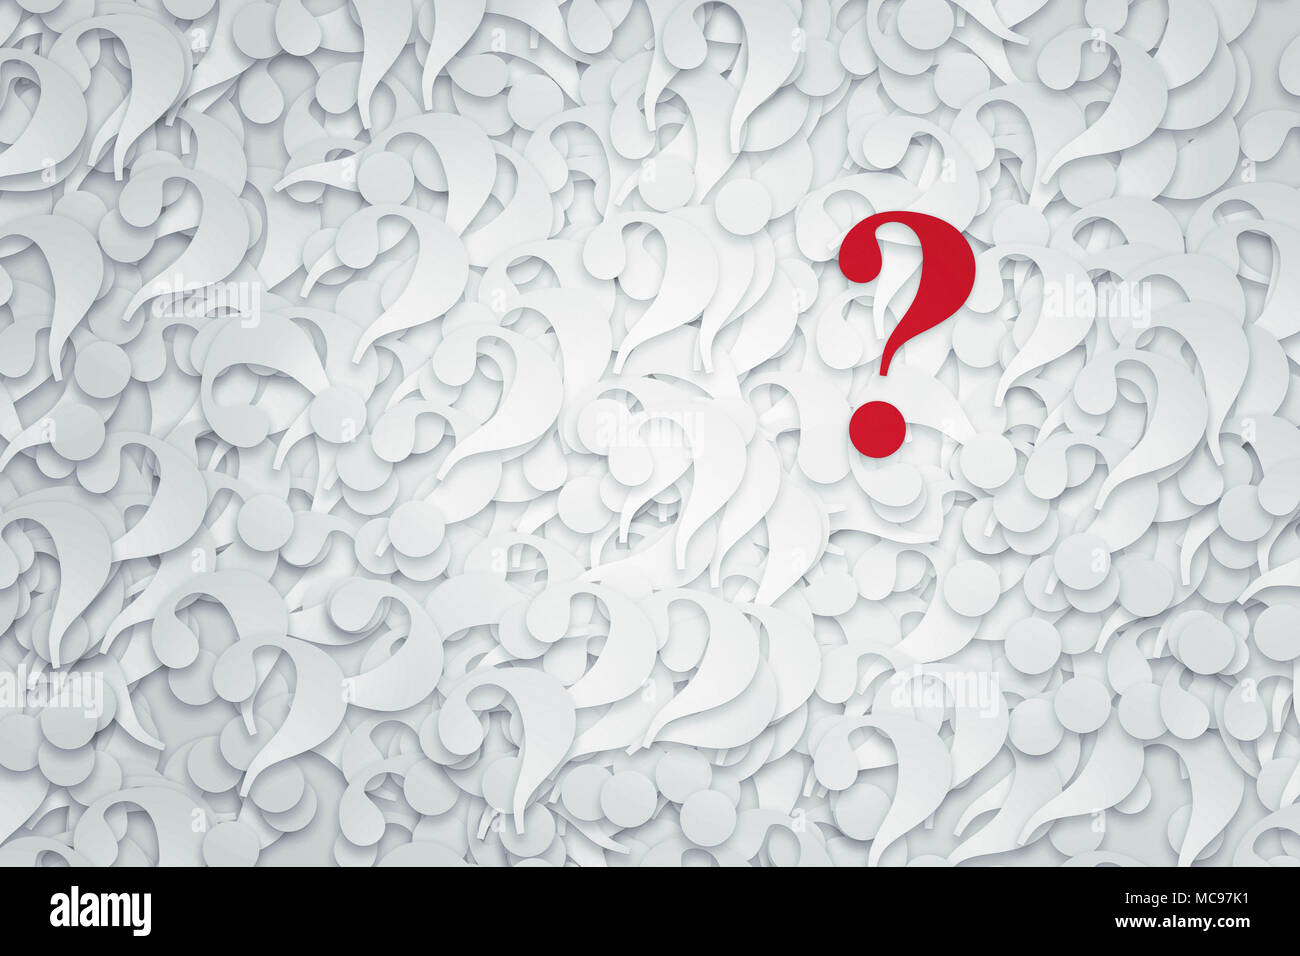 Stack of question marks and one red question mark. Stock Photo